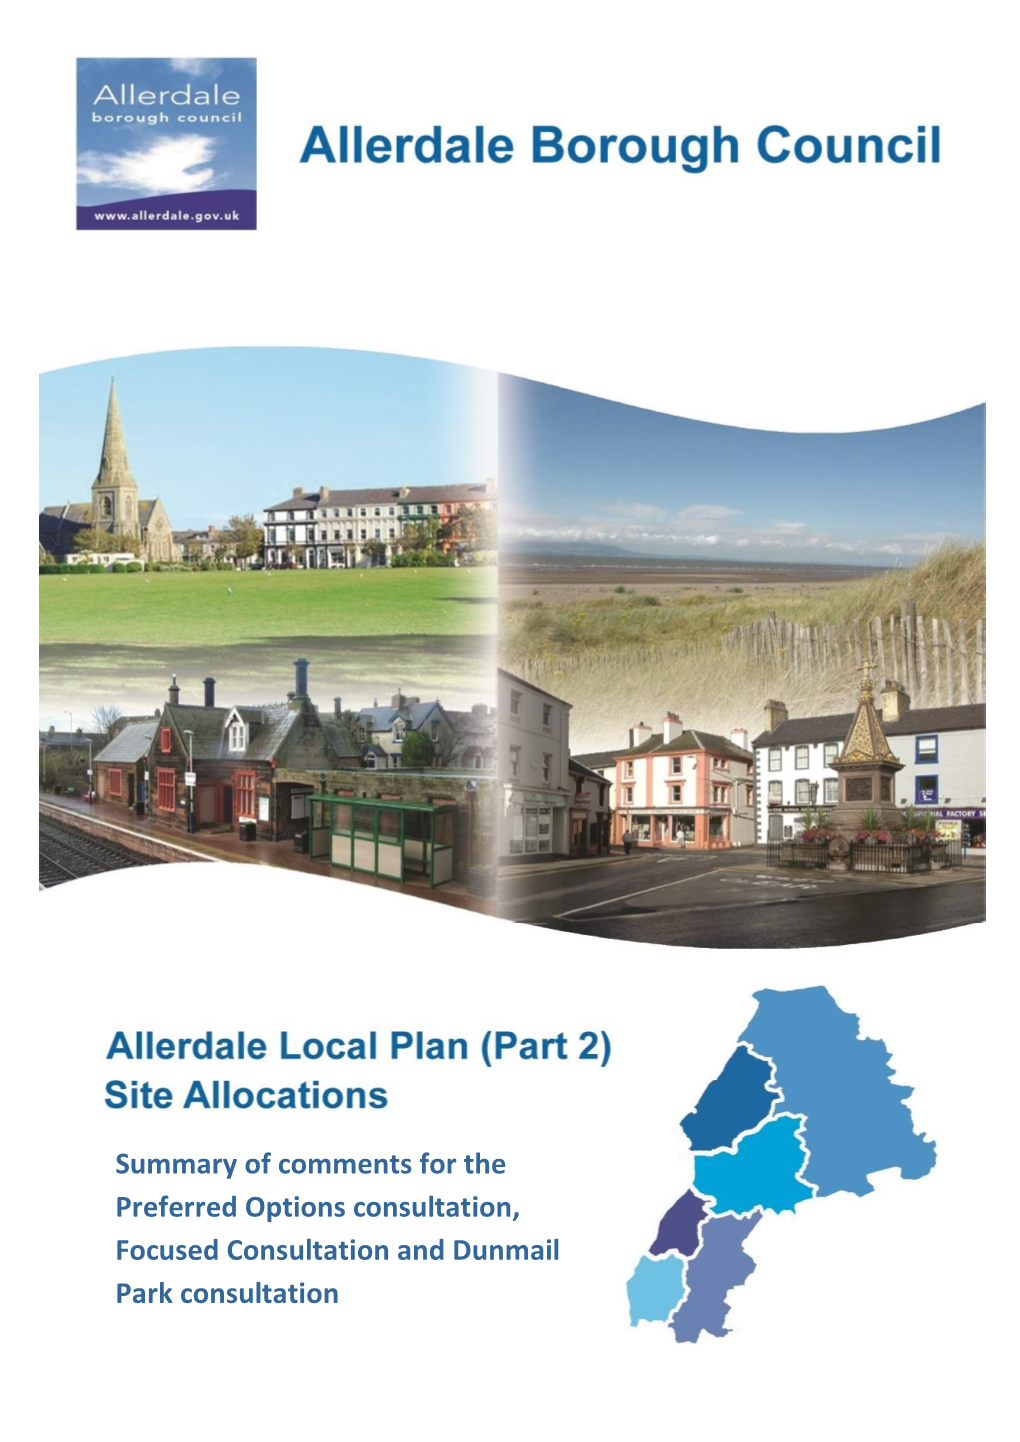 Summary of Comments for the Preferred Options Consultation, Focused Consultation and Dunmail Park Consultation